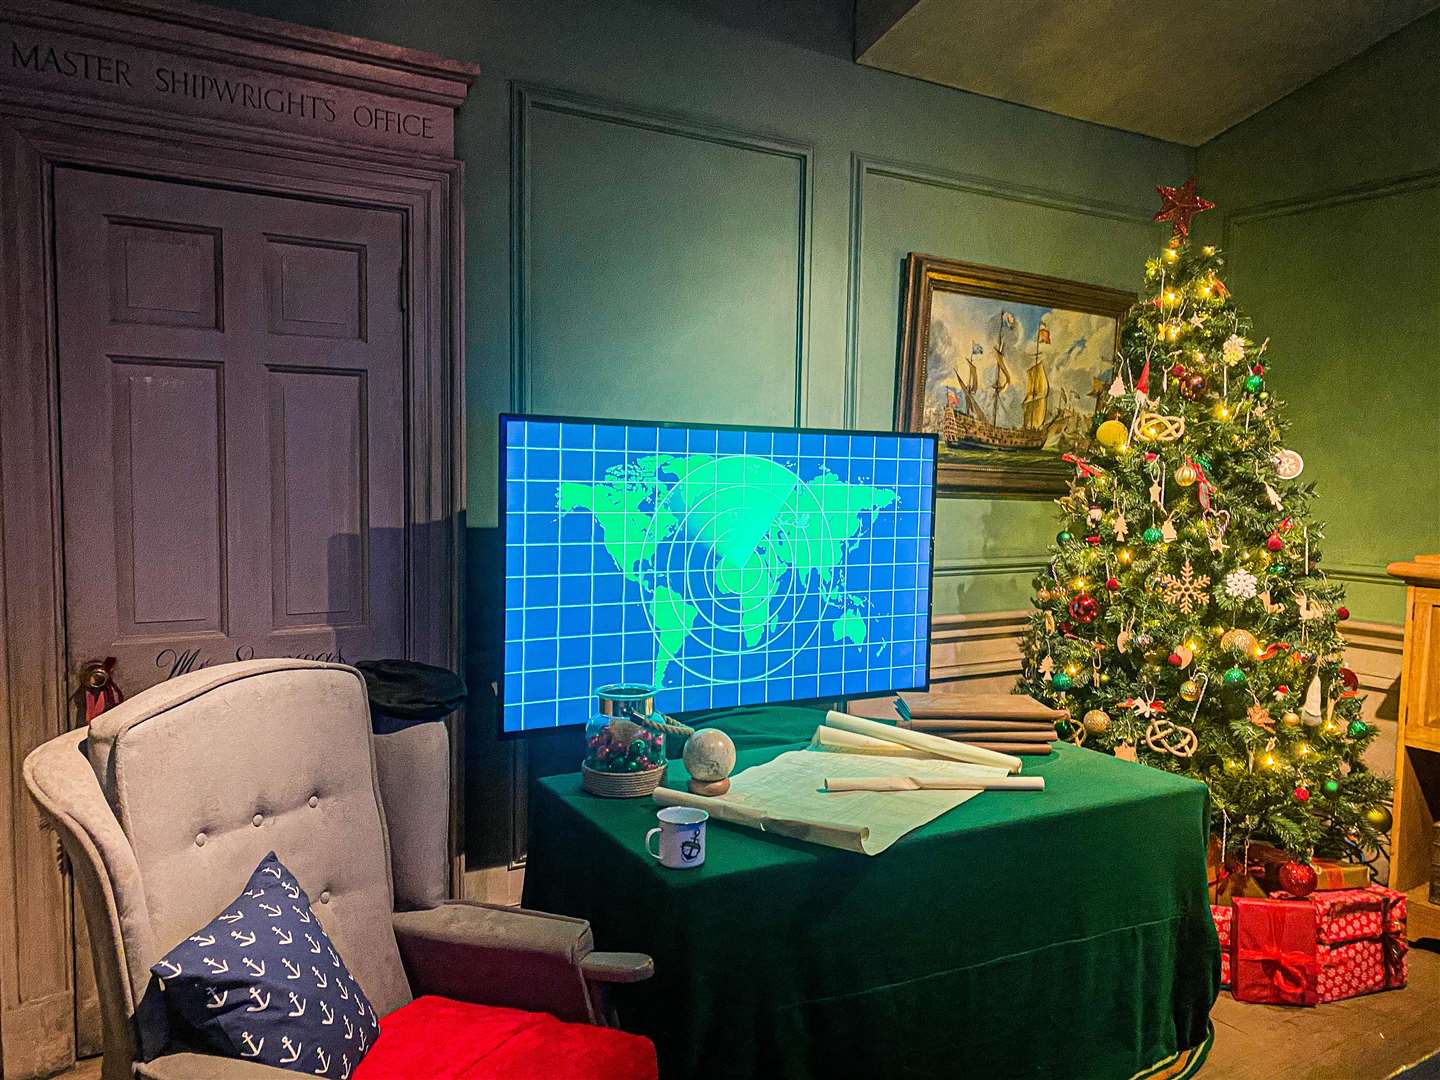 Each room has its own unique theme to help tell the Mission Christmas story